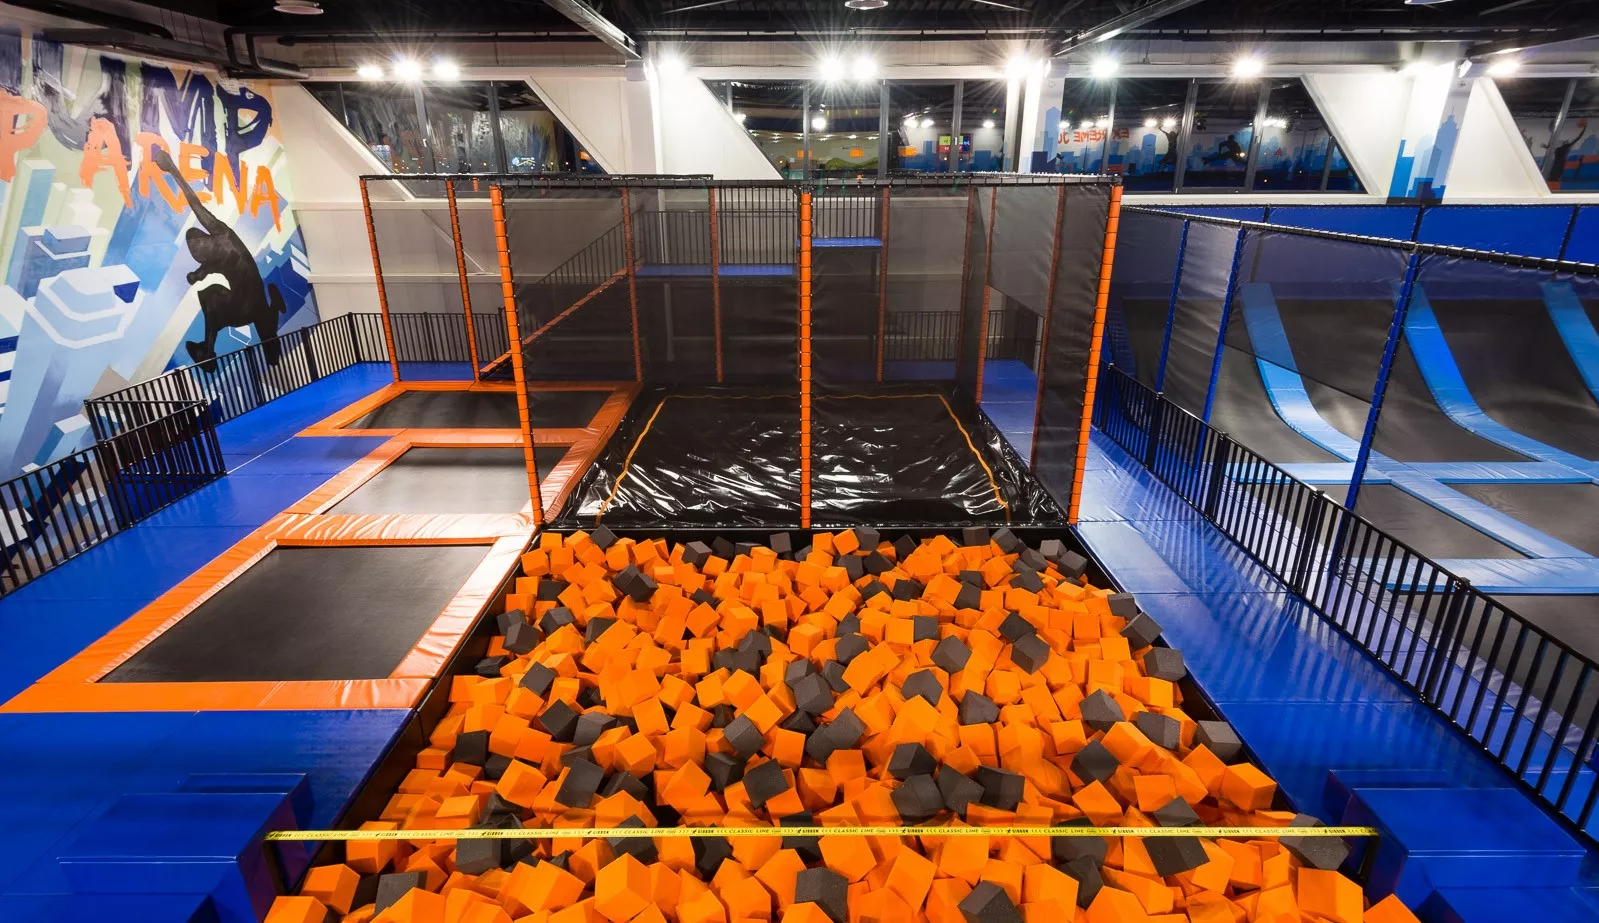 JUMP ARENA in Slovakia, Europe | Trampolining - Rated 4.2